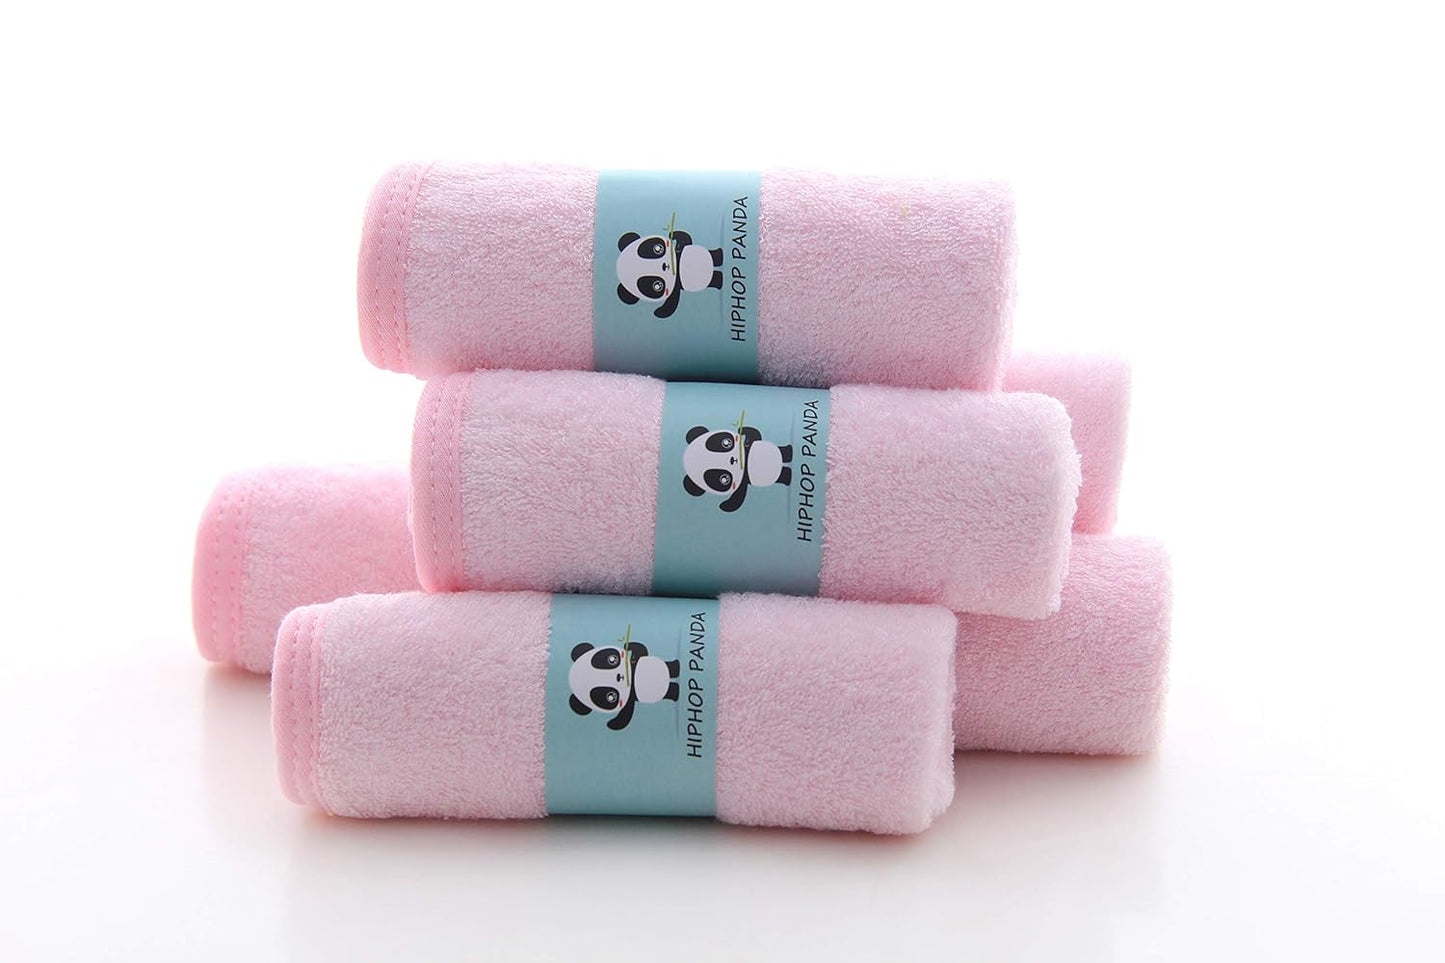 HIPHOP PANDA Baby Wash Clothes, Rayon Made from Bamboo - 2 Layer Ultra Soft Absorbent Washcloths for Boy - Newborn Face Towel - Makeup Remove Washcloths for Delicate Skin - (Gray, 6 Pack)